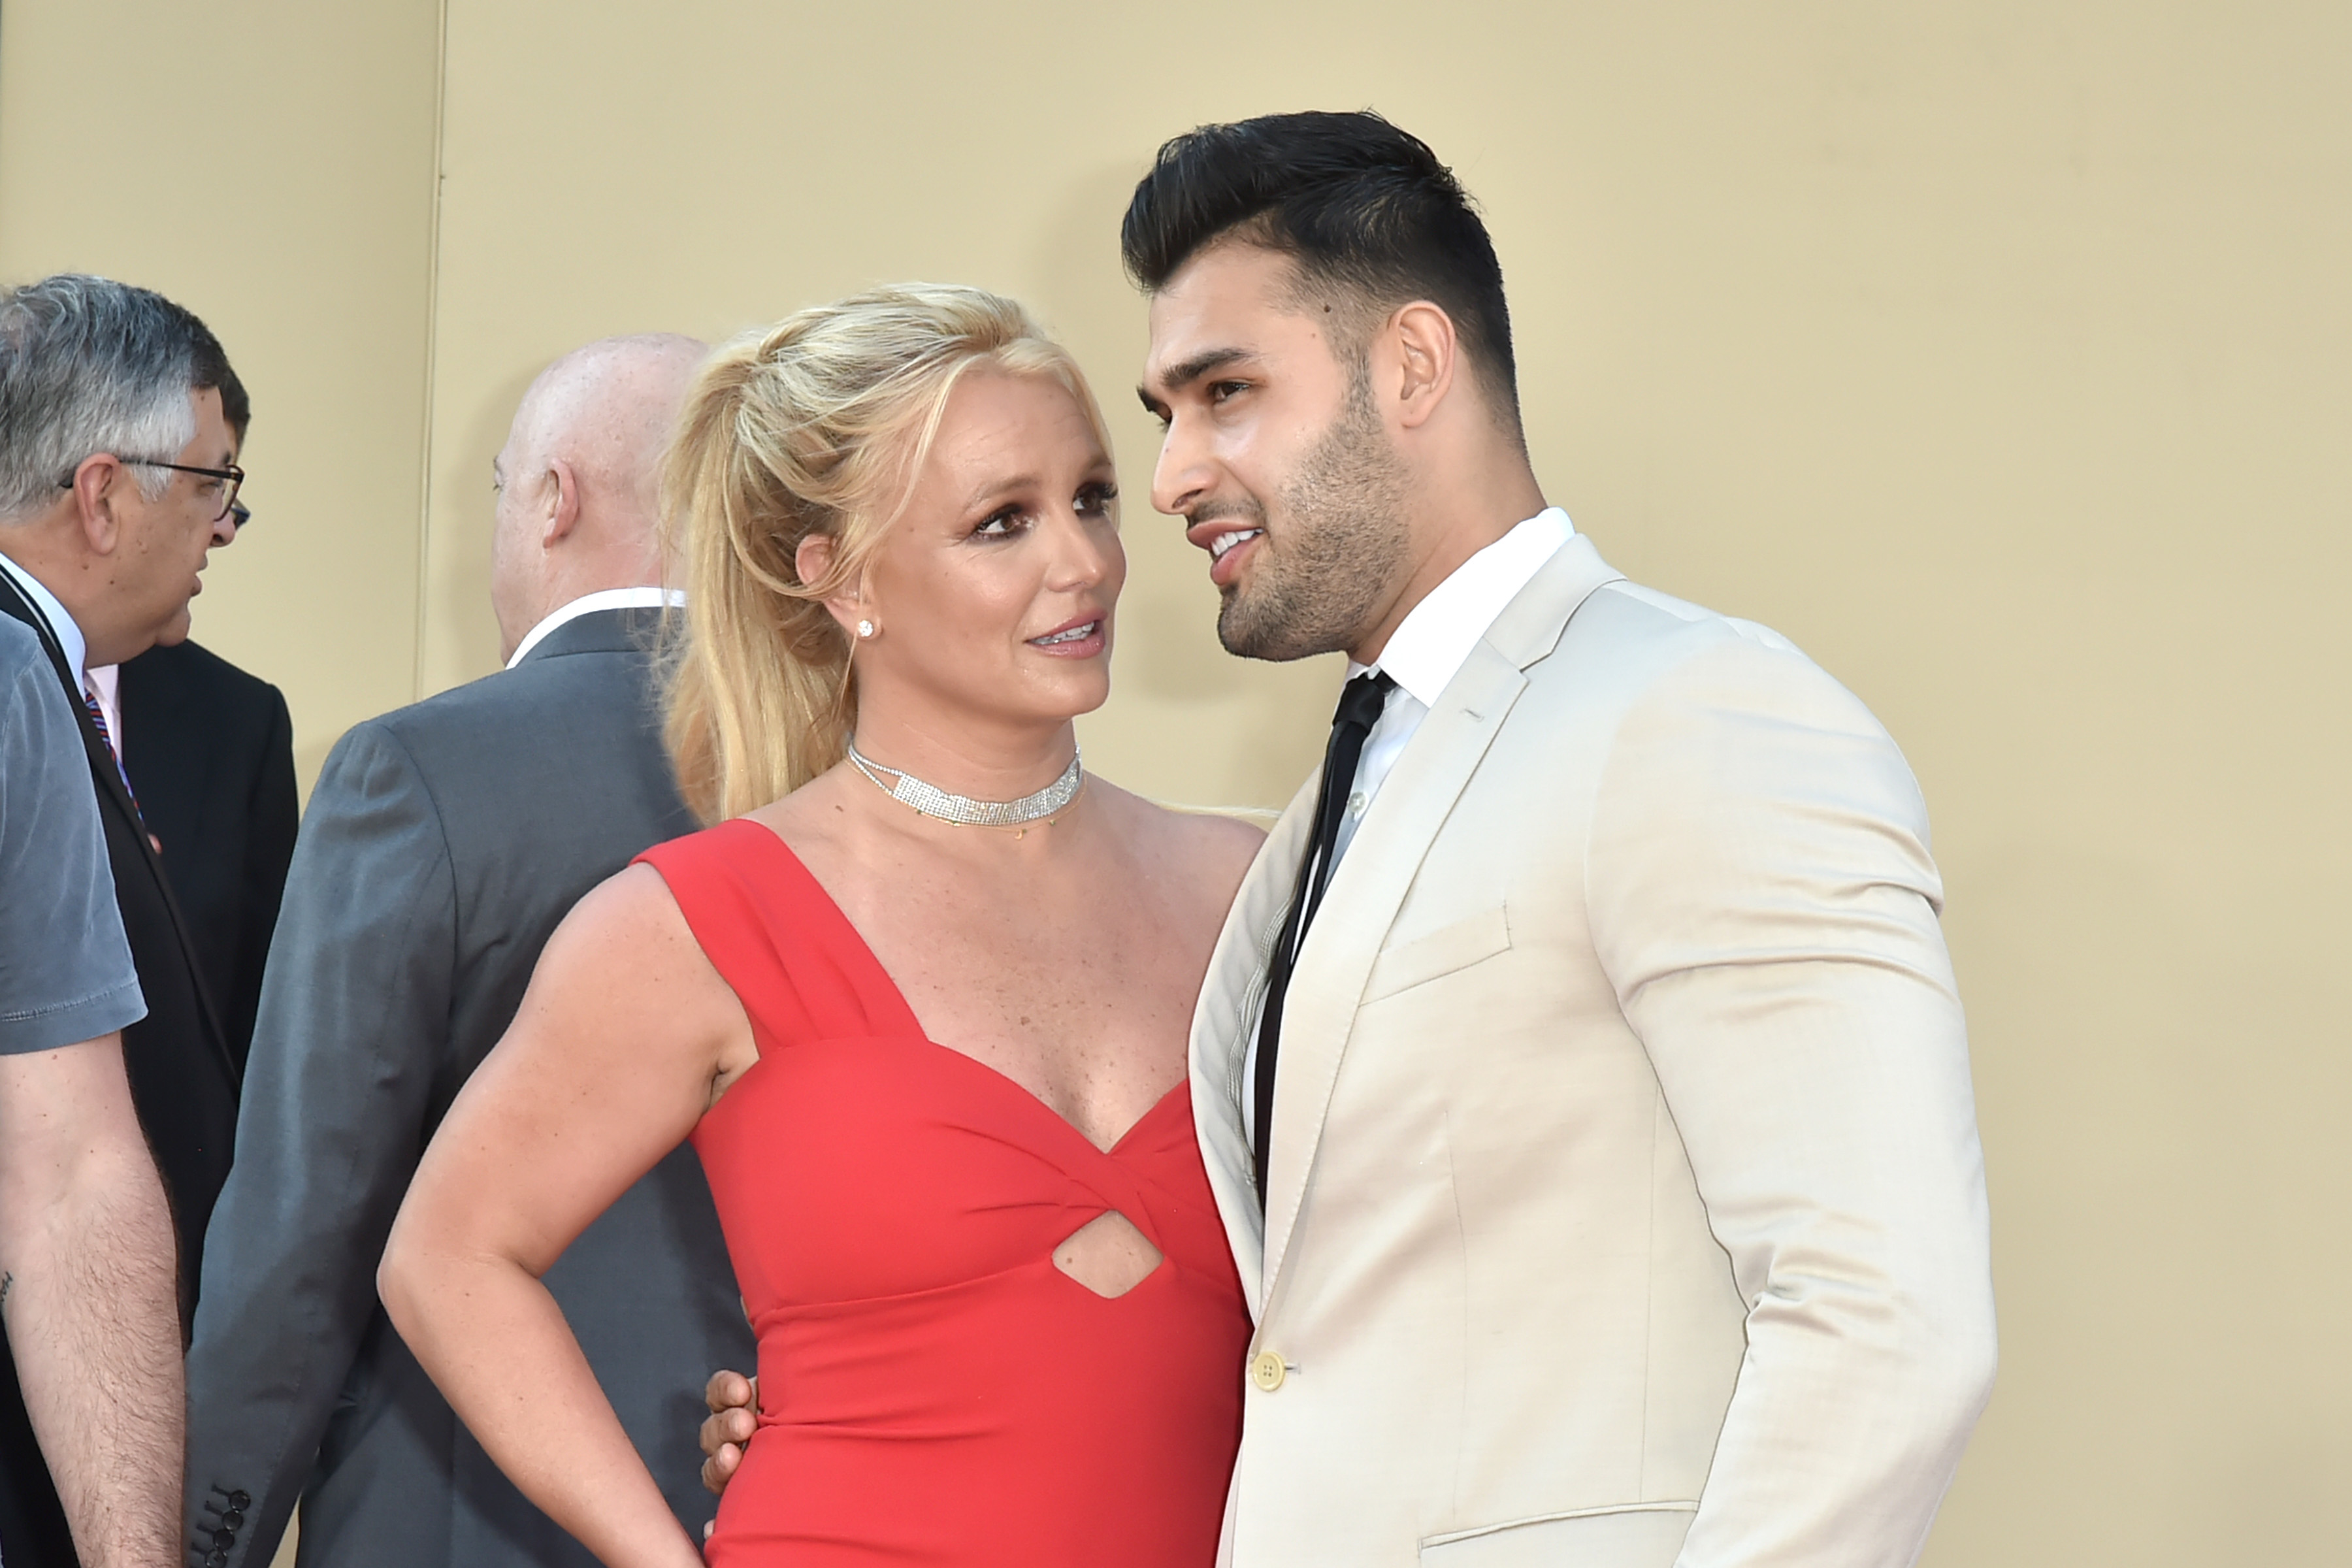 Close-up of Britney looking at Sam, who has his arm around her waist